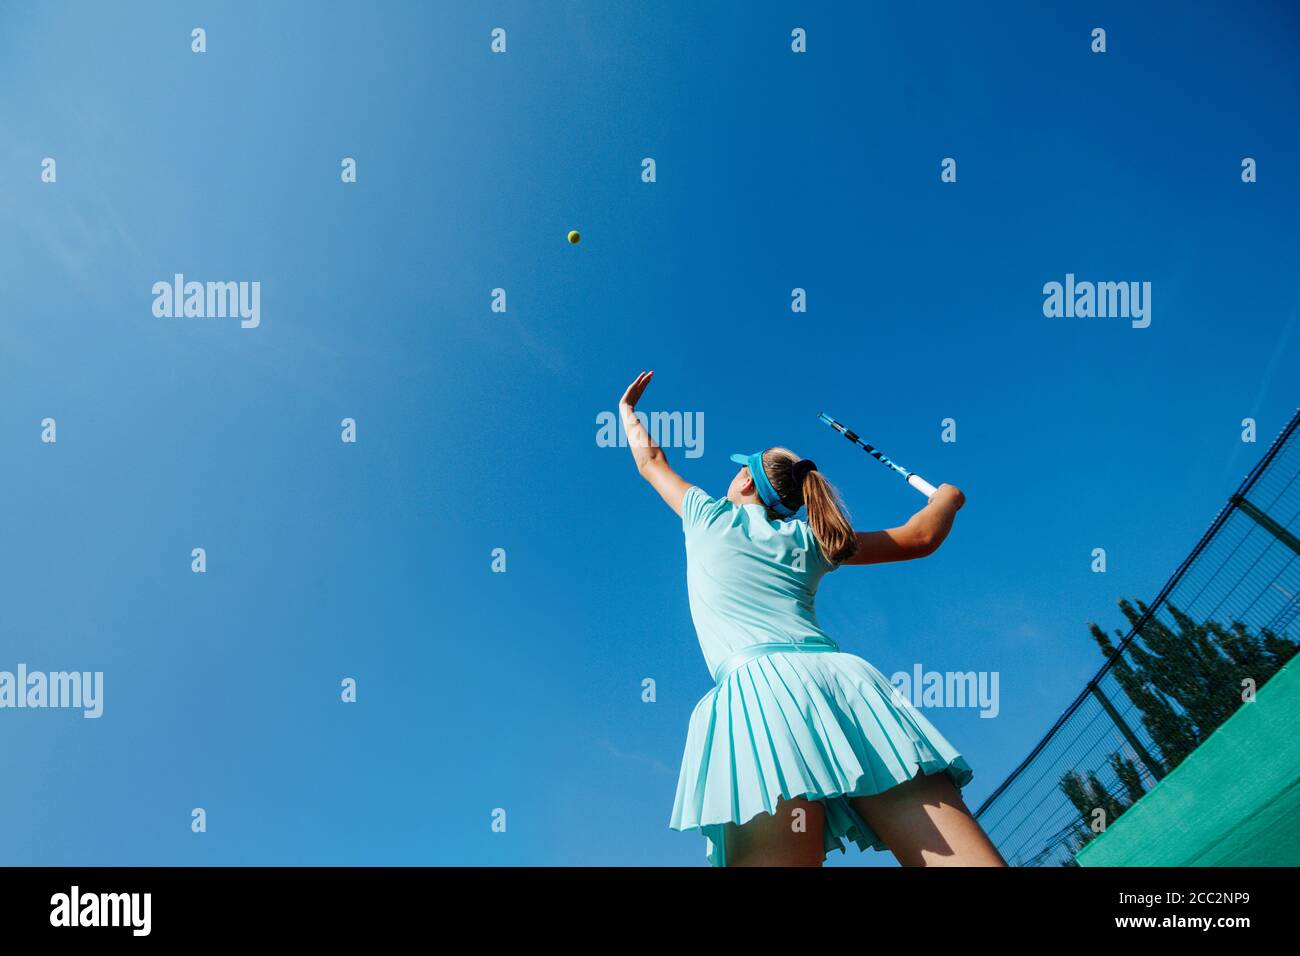 Low angle shot of a teenage girl playing tennis, throwing ball up and serving Stock Photo